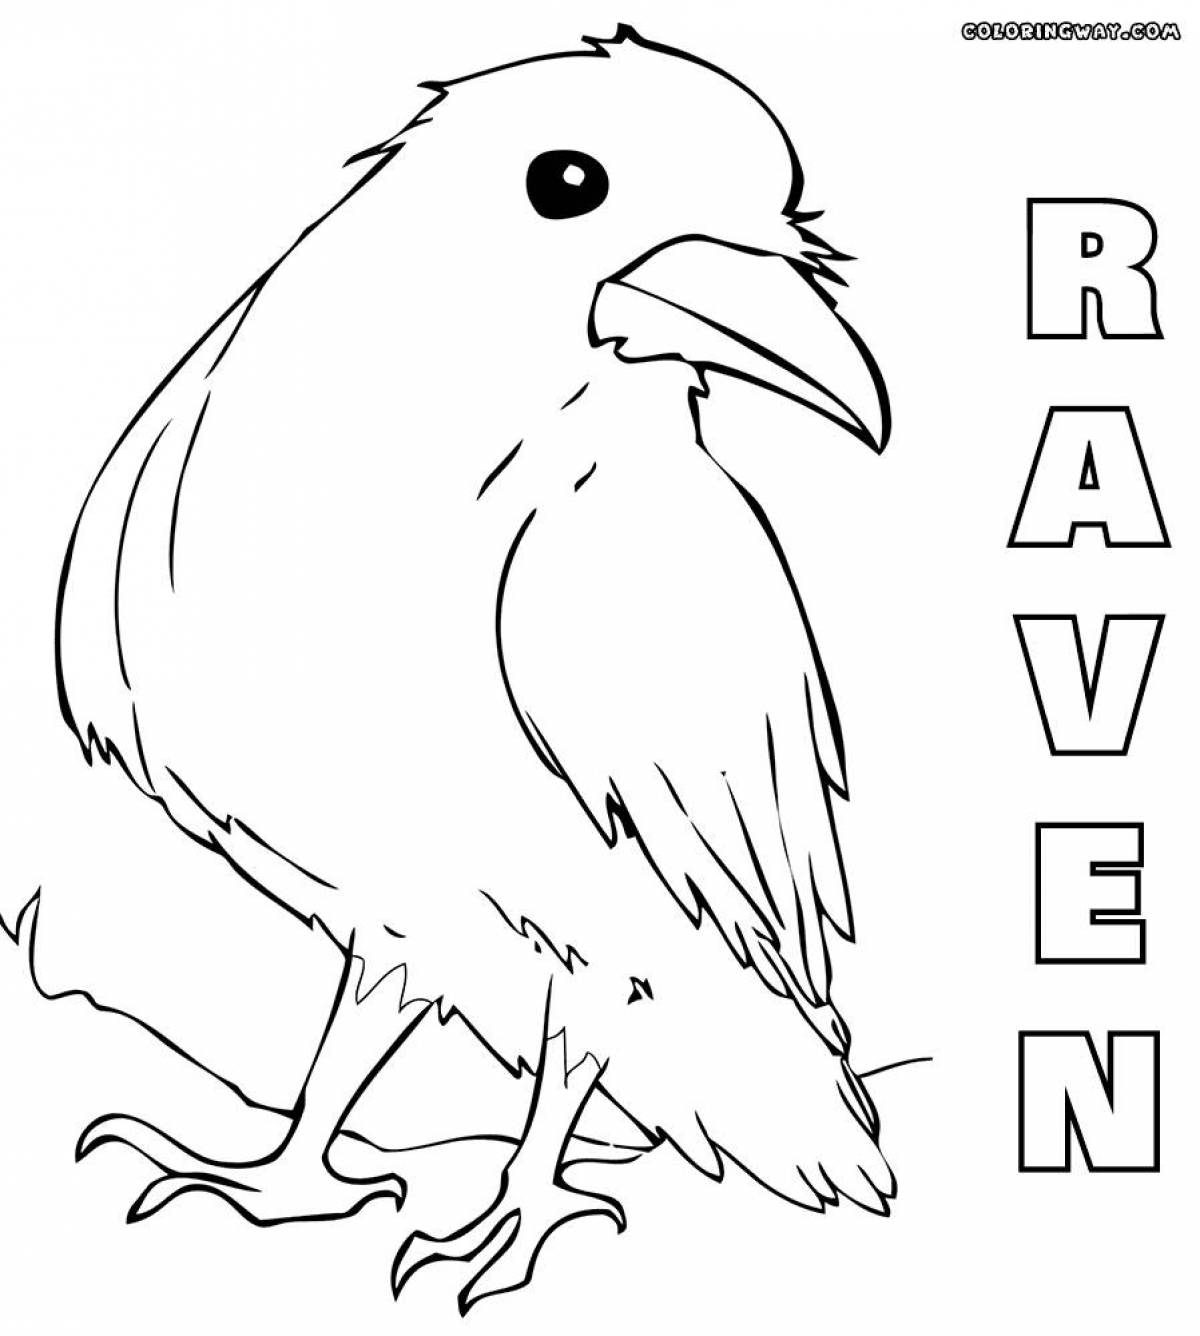 Animated crow coloring page for kids